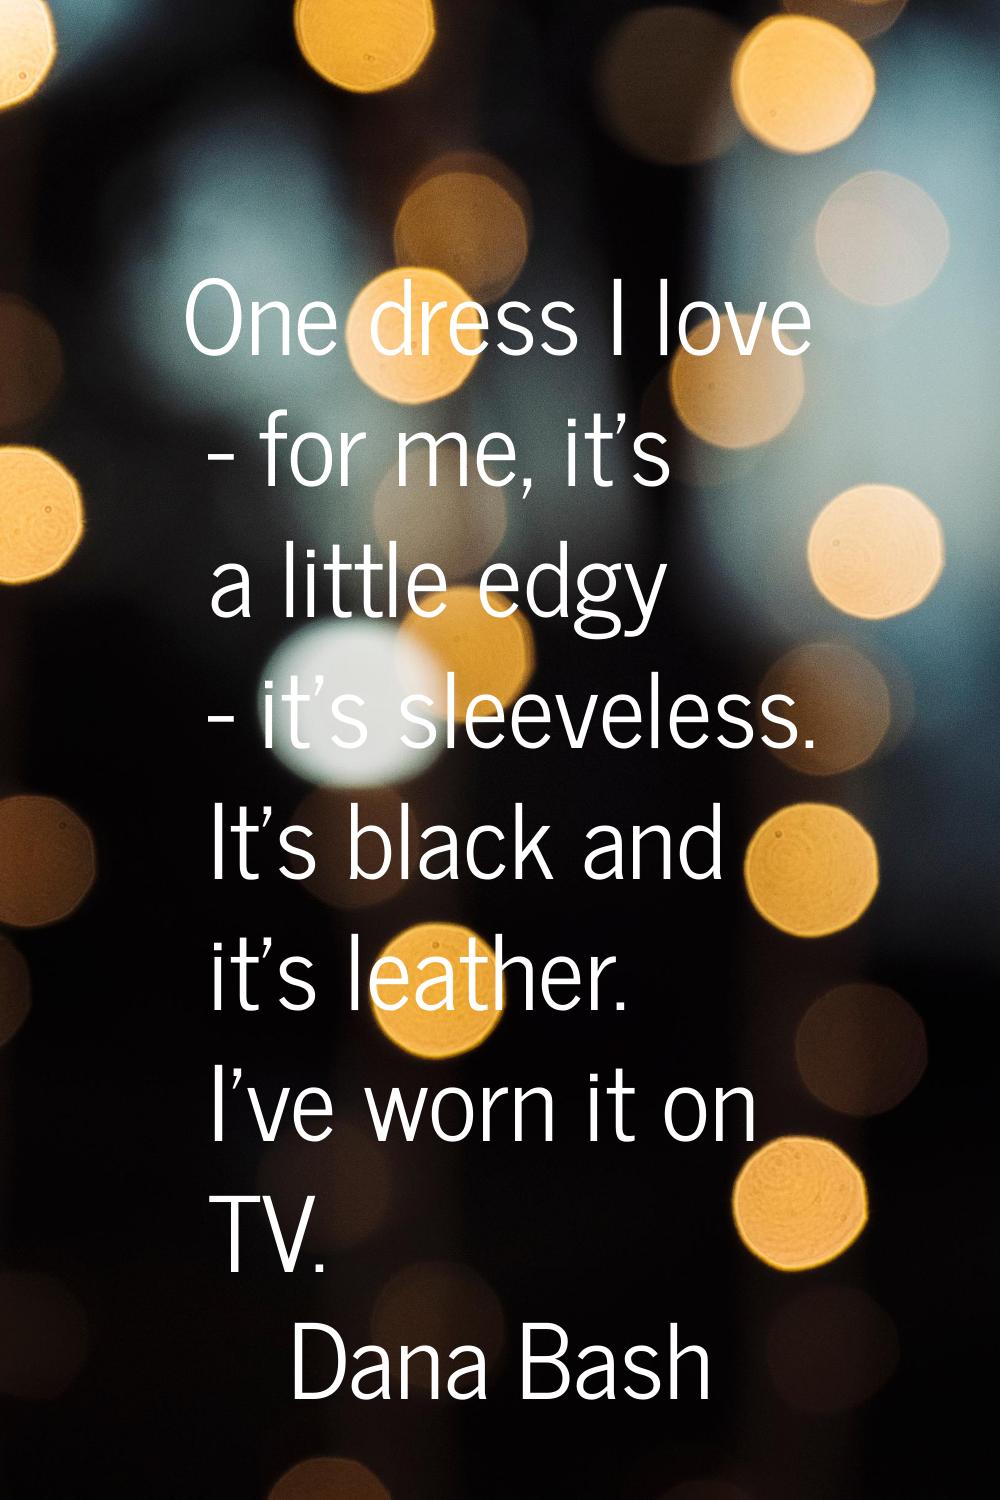 One dress I love - for me, it's a little edgy - it's sleeveless. It's black and it's leather. I've 